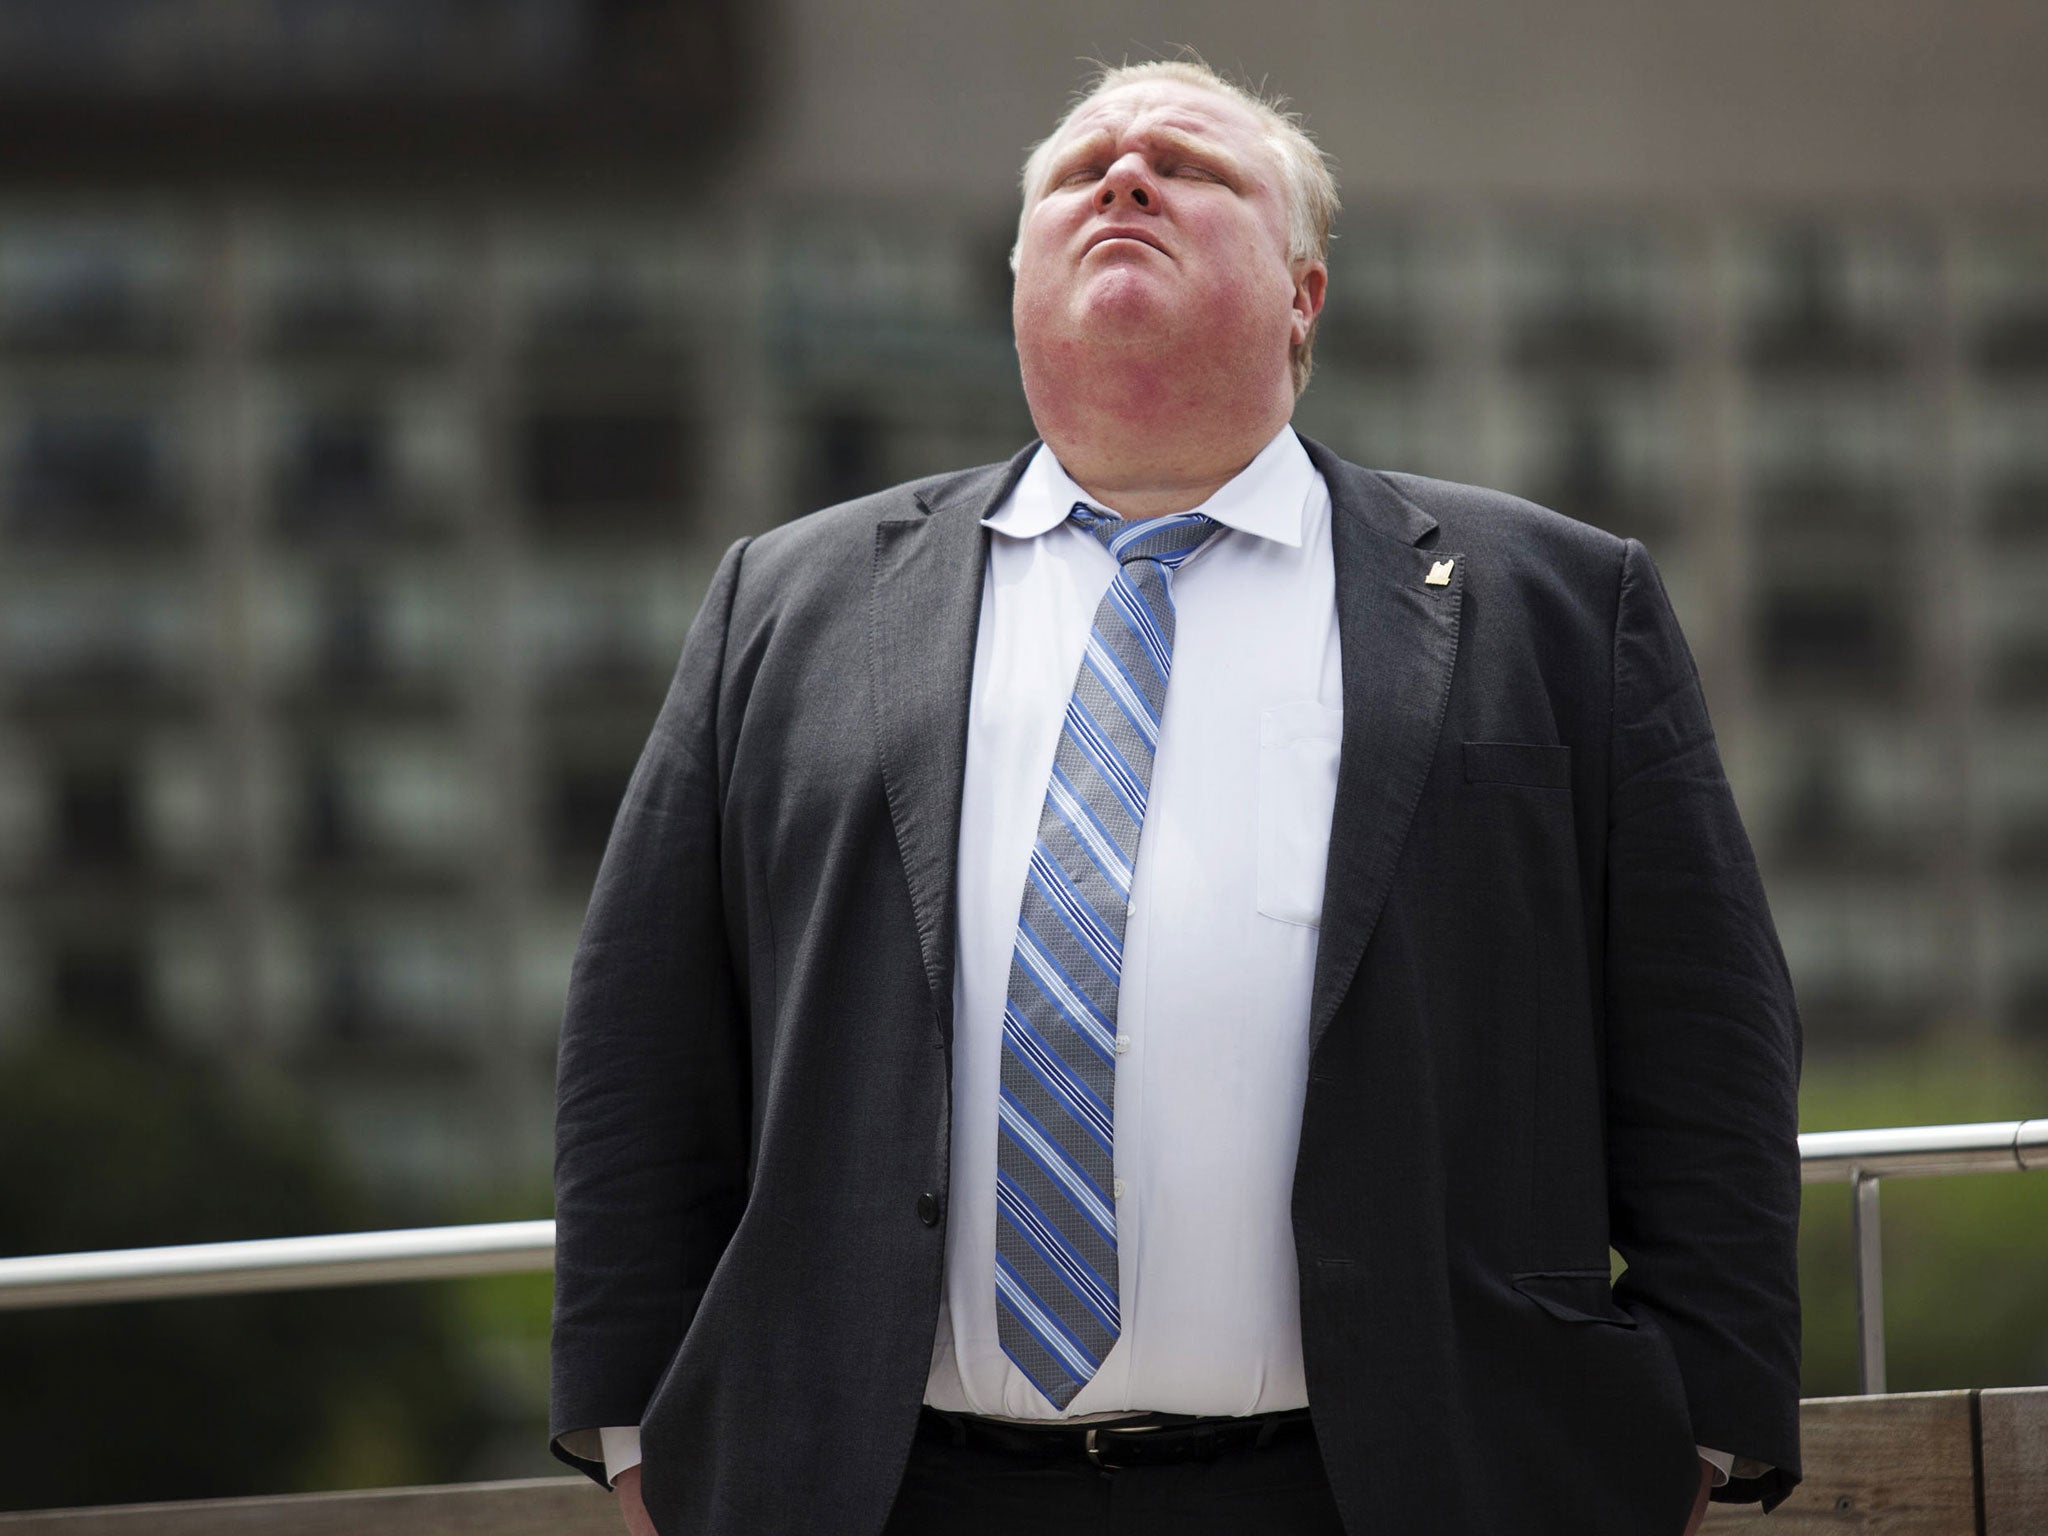 The latest scandal to hit The Toronto Mayor, Rob Ford, is an alleged video of him smoking crack cocaine that’s been seen by three journalists who all identified the Mayor